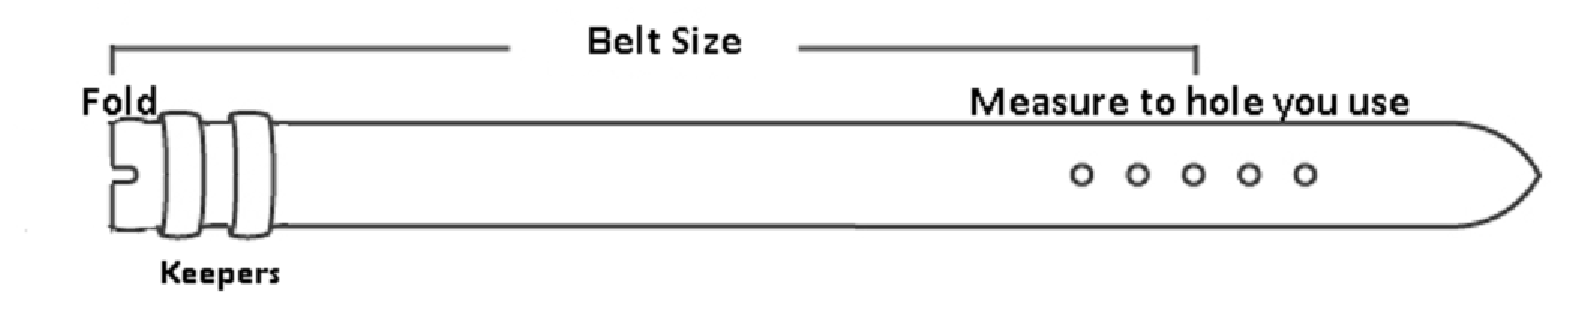 Belt Ordering and Sizing - J.B. Hill Boot Company | J.B. Hill Boot Company